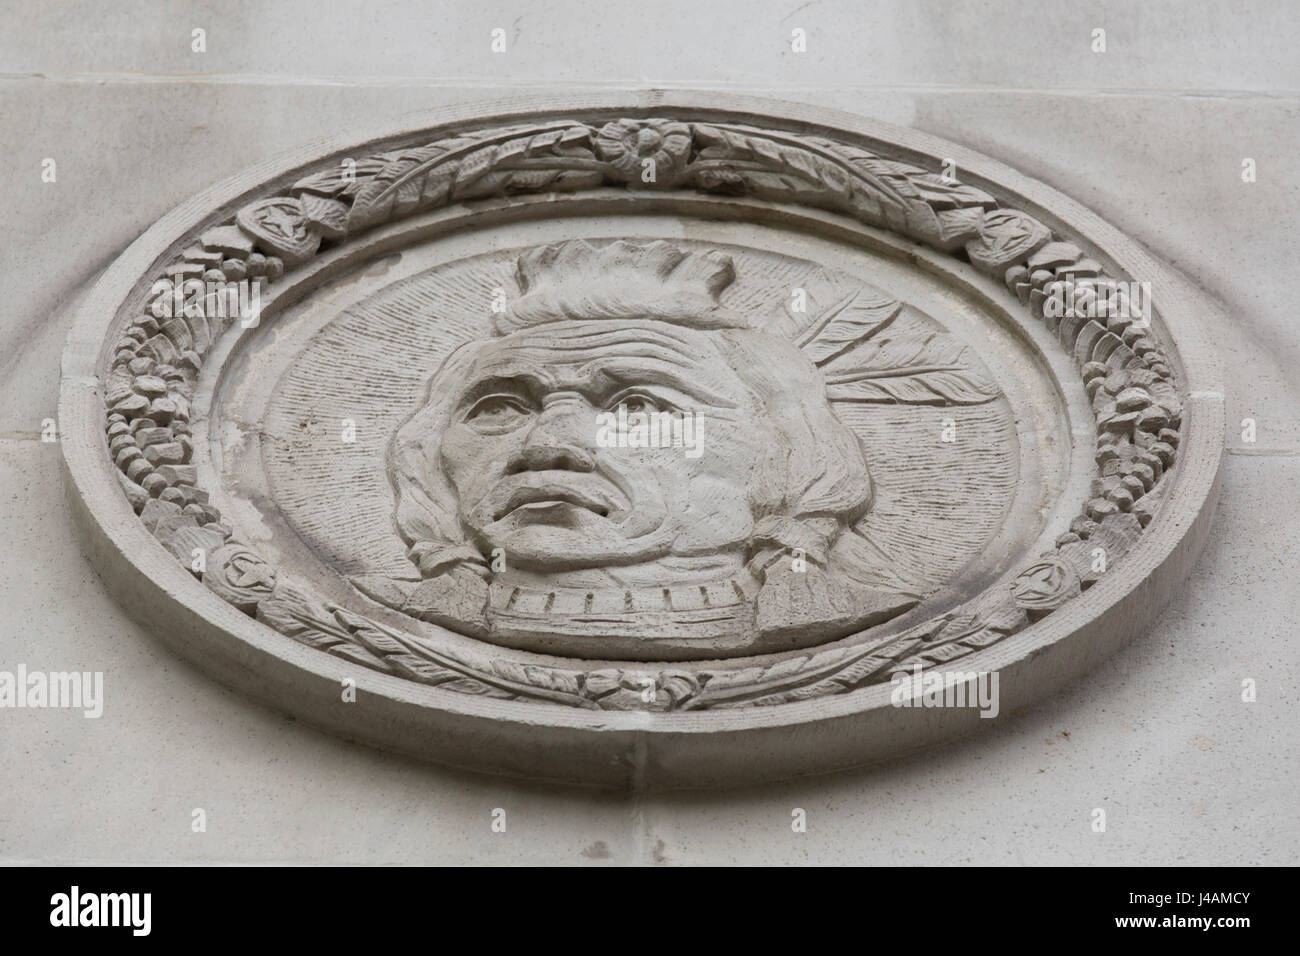 Depiction of a First Nations chief on the wall of the Fairmont Vancouver Hotel in Vancouver, Canada. Stock Photo